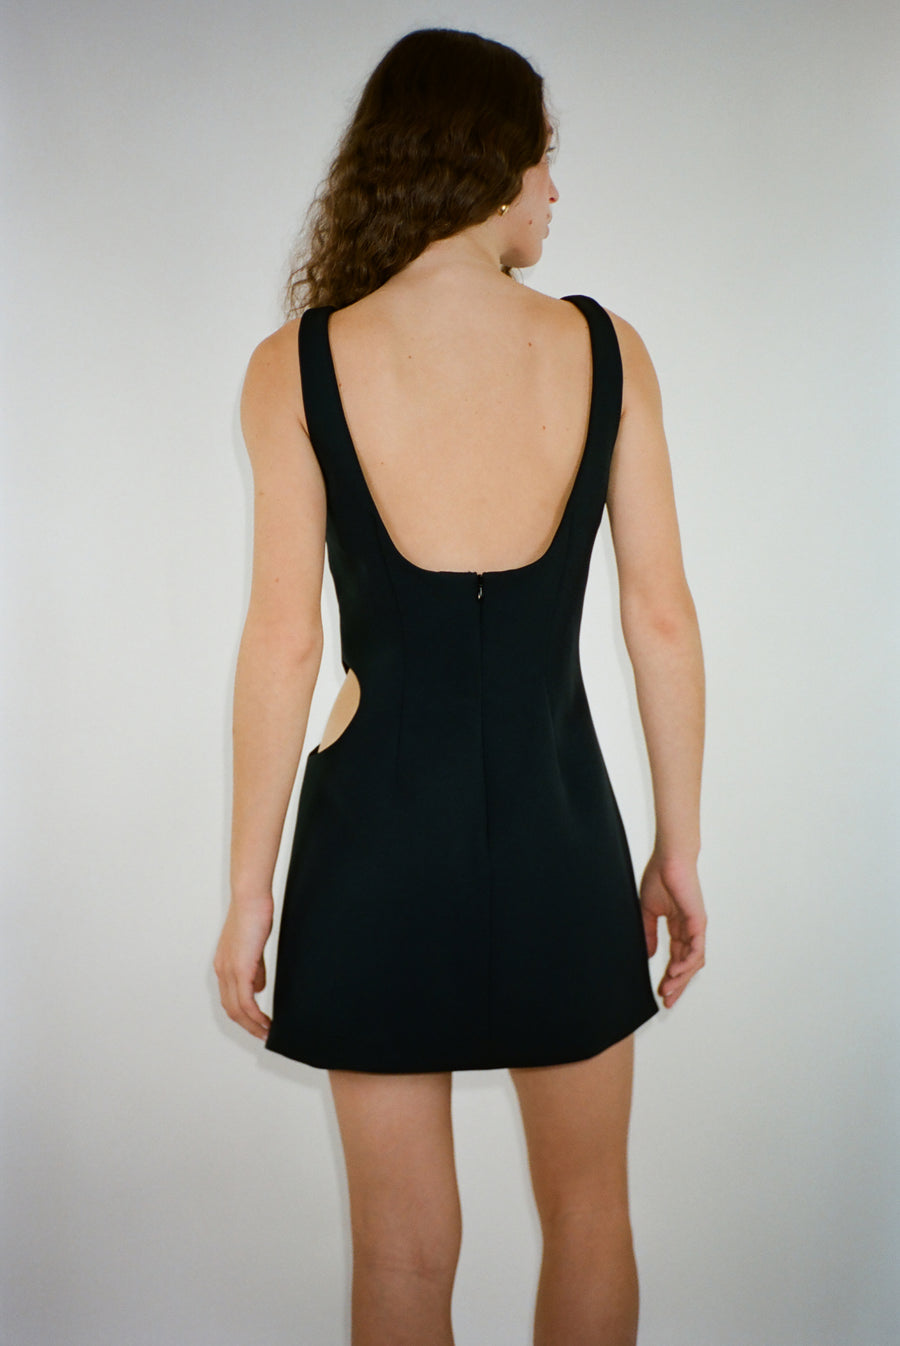 Mini dress in black with cut out on side on model